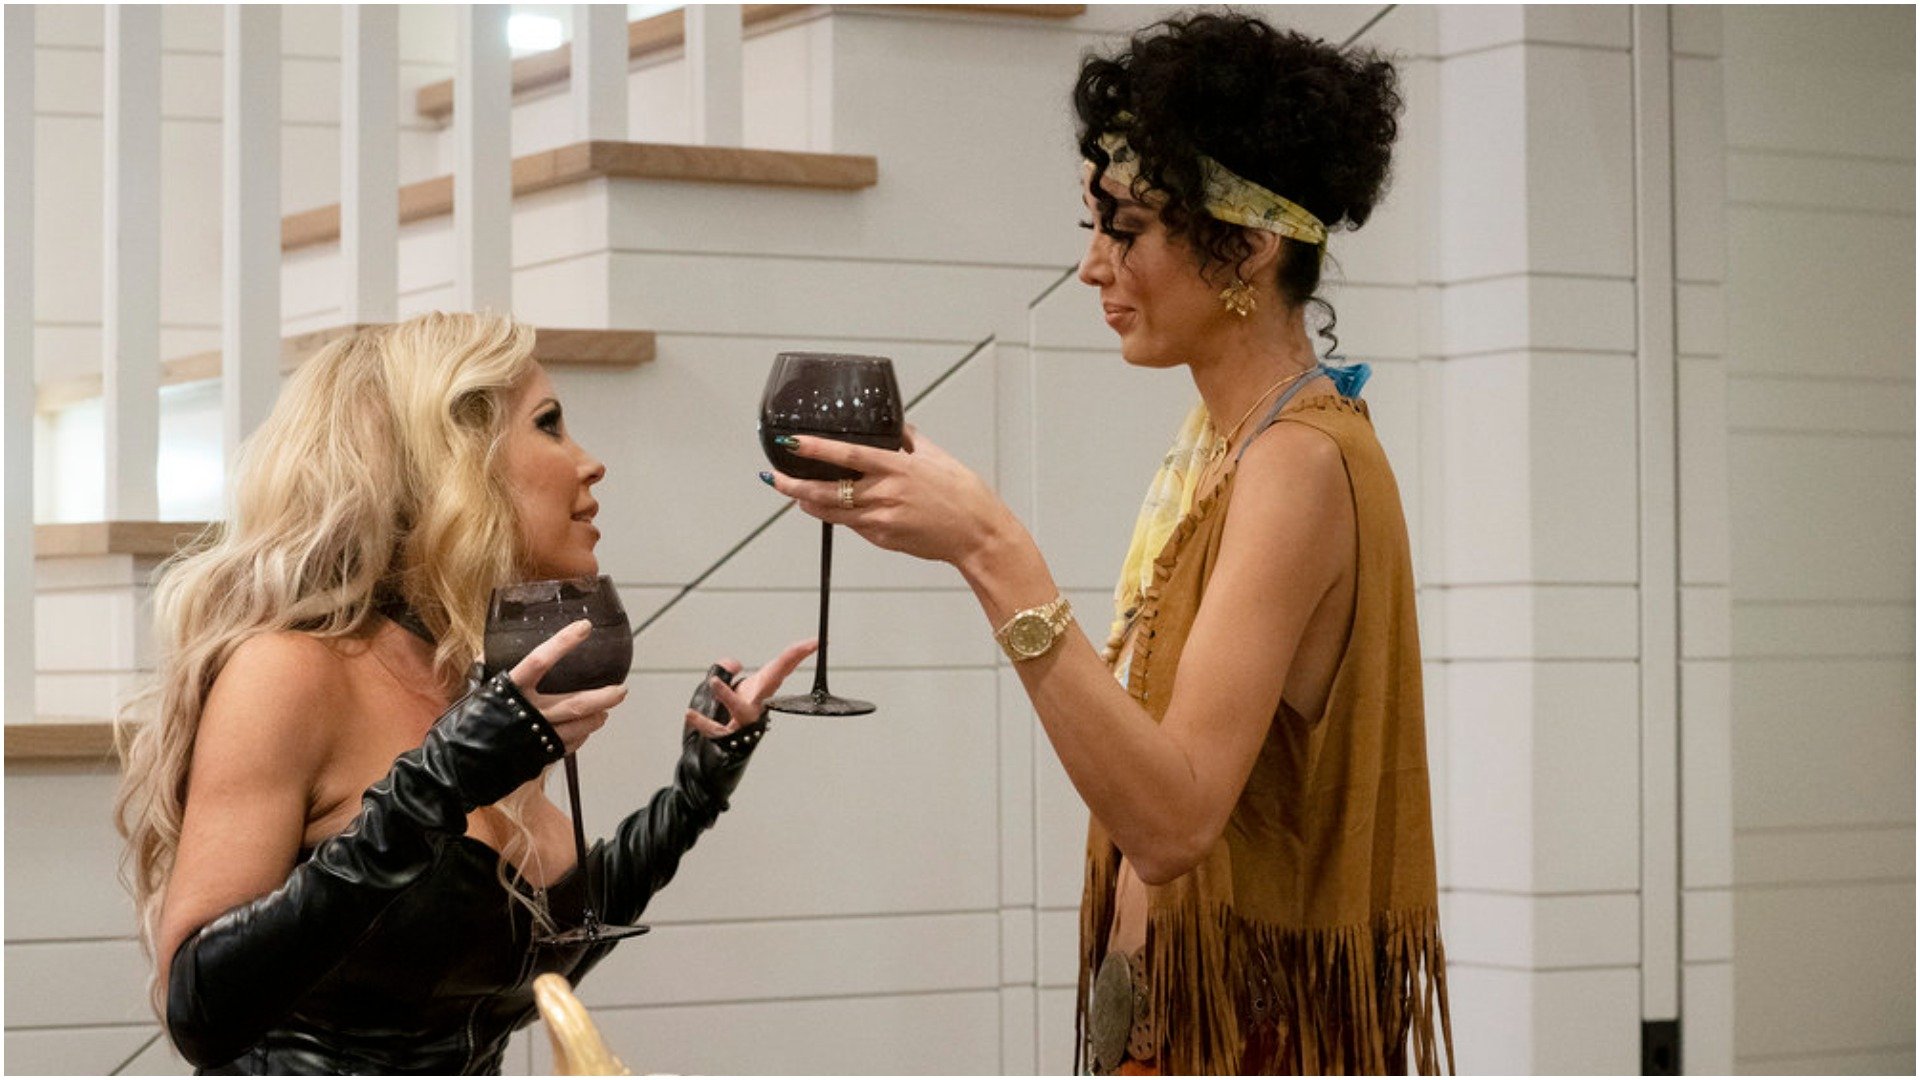 Jen Armstrong, Noella Bergener from 'RHOC' dressed in costumes have a conversation while holding a glass of wine 